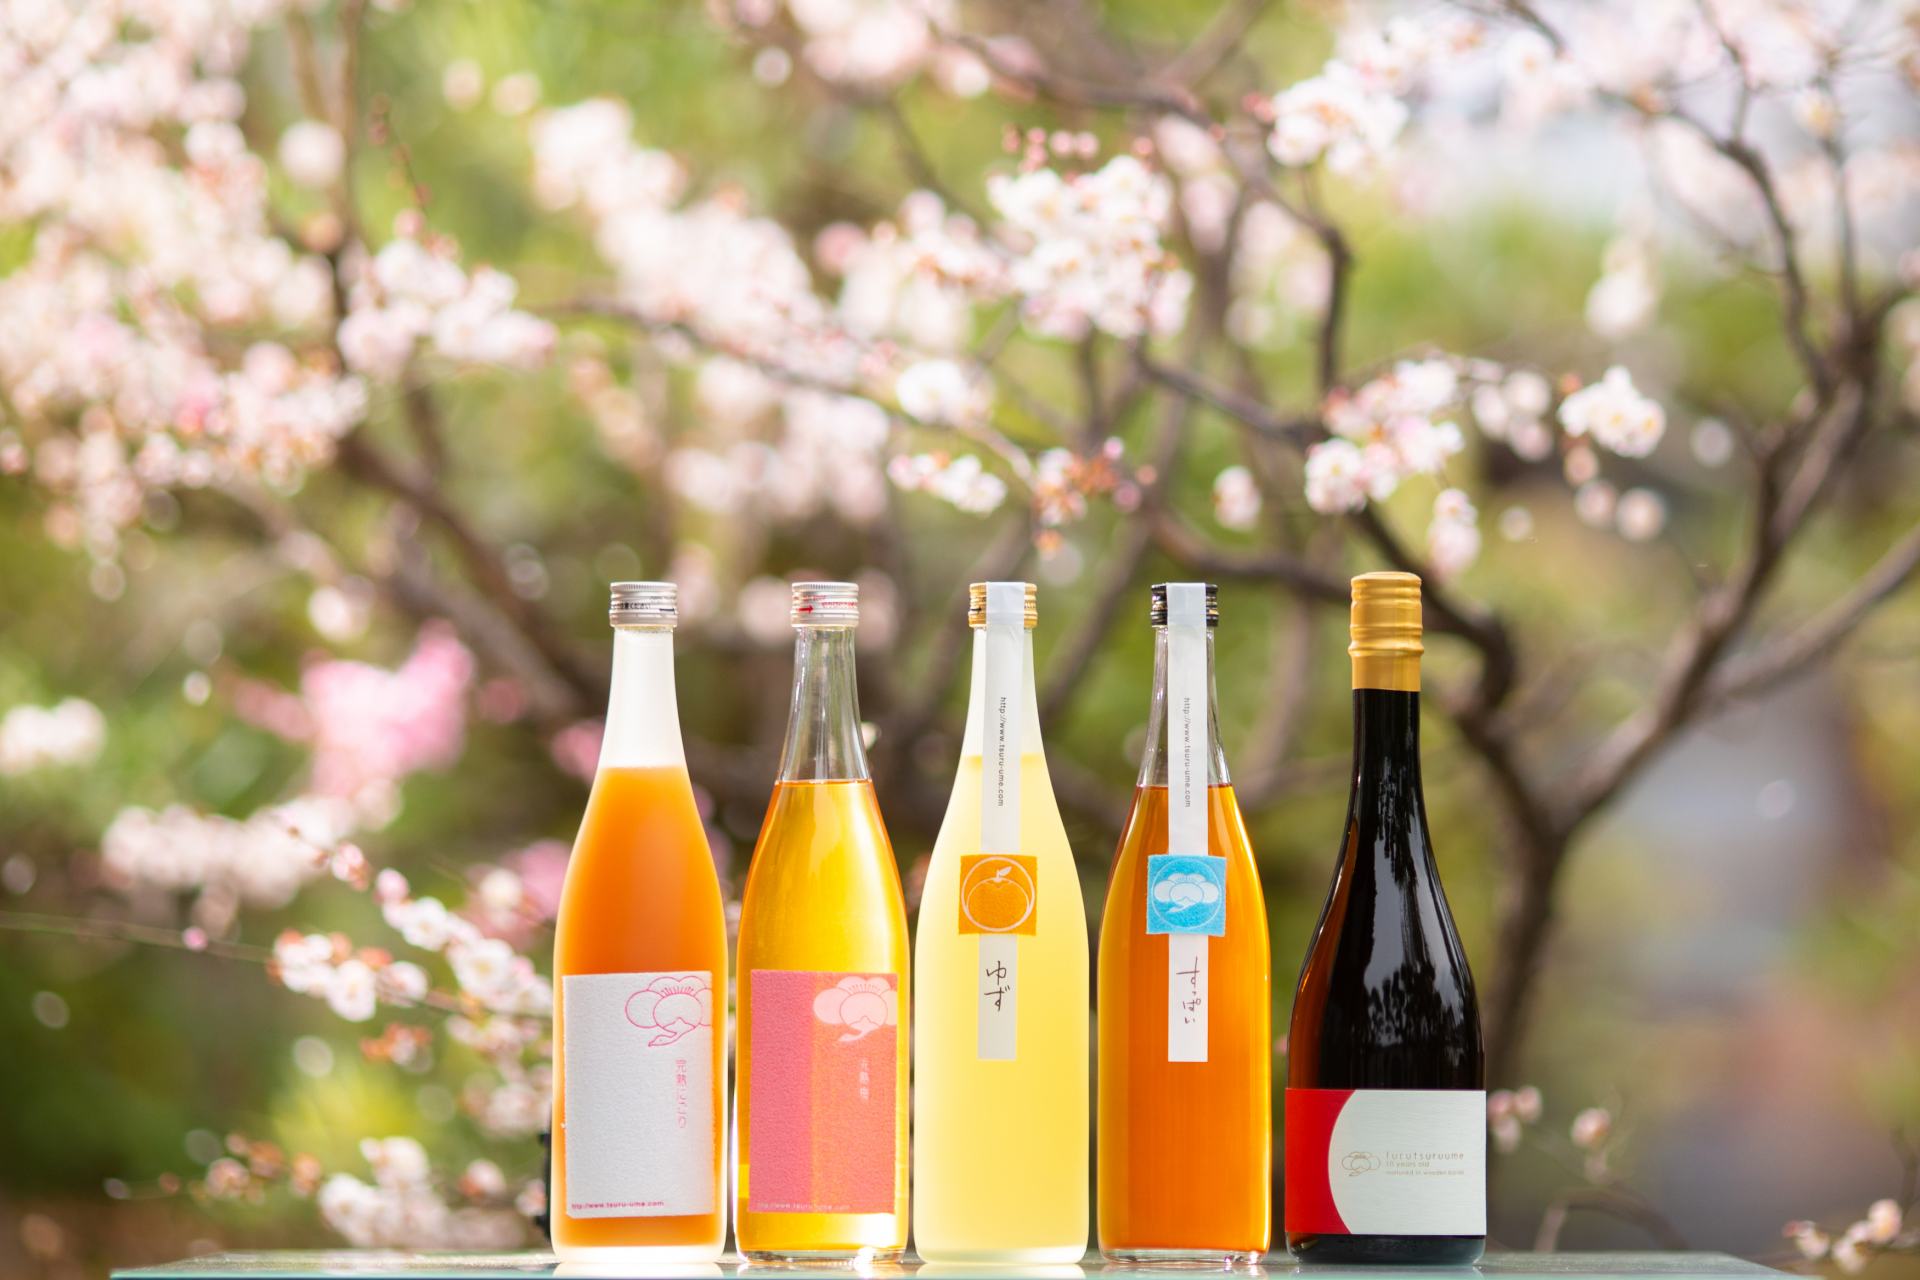 The "Tsuruume" series of liqueurs made with Japanese sake and fruits from Wakayama.